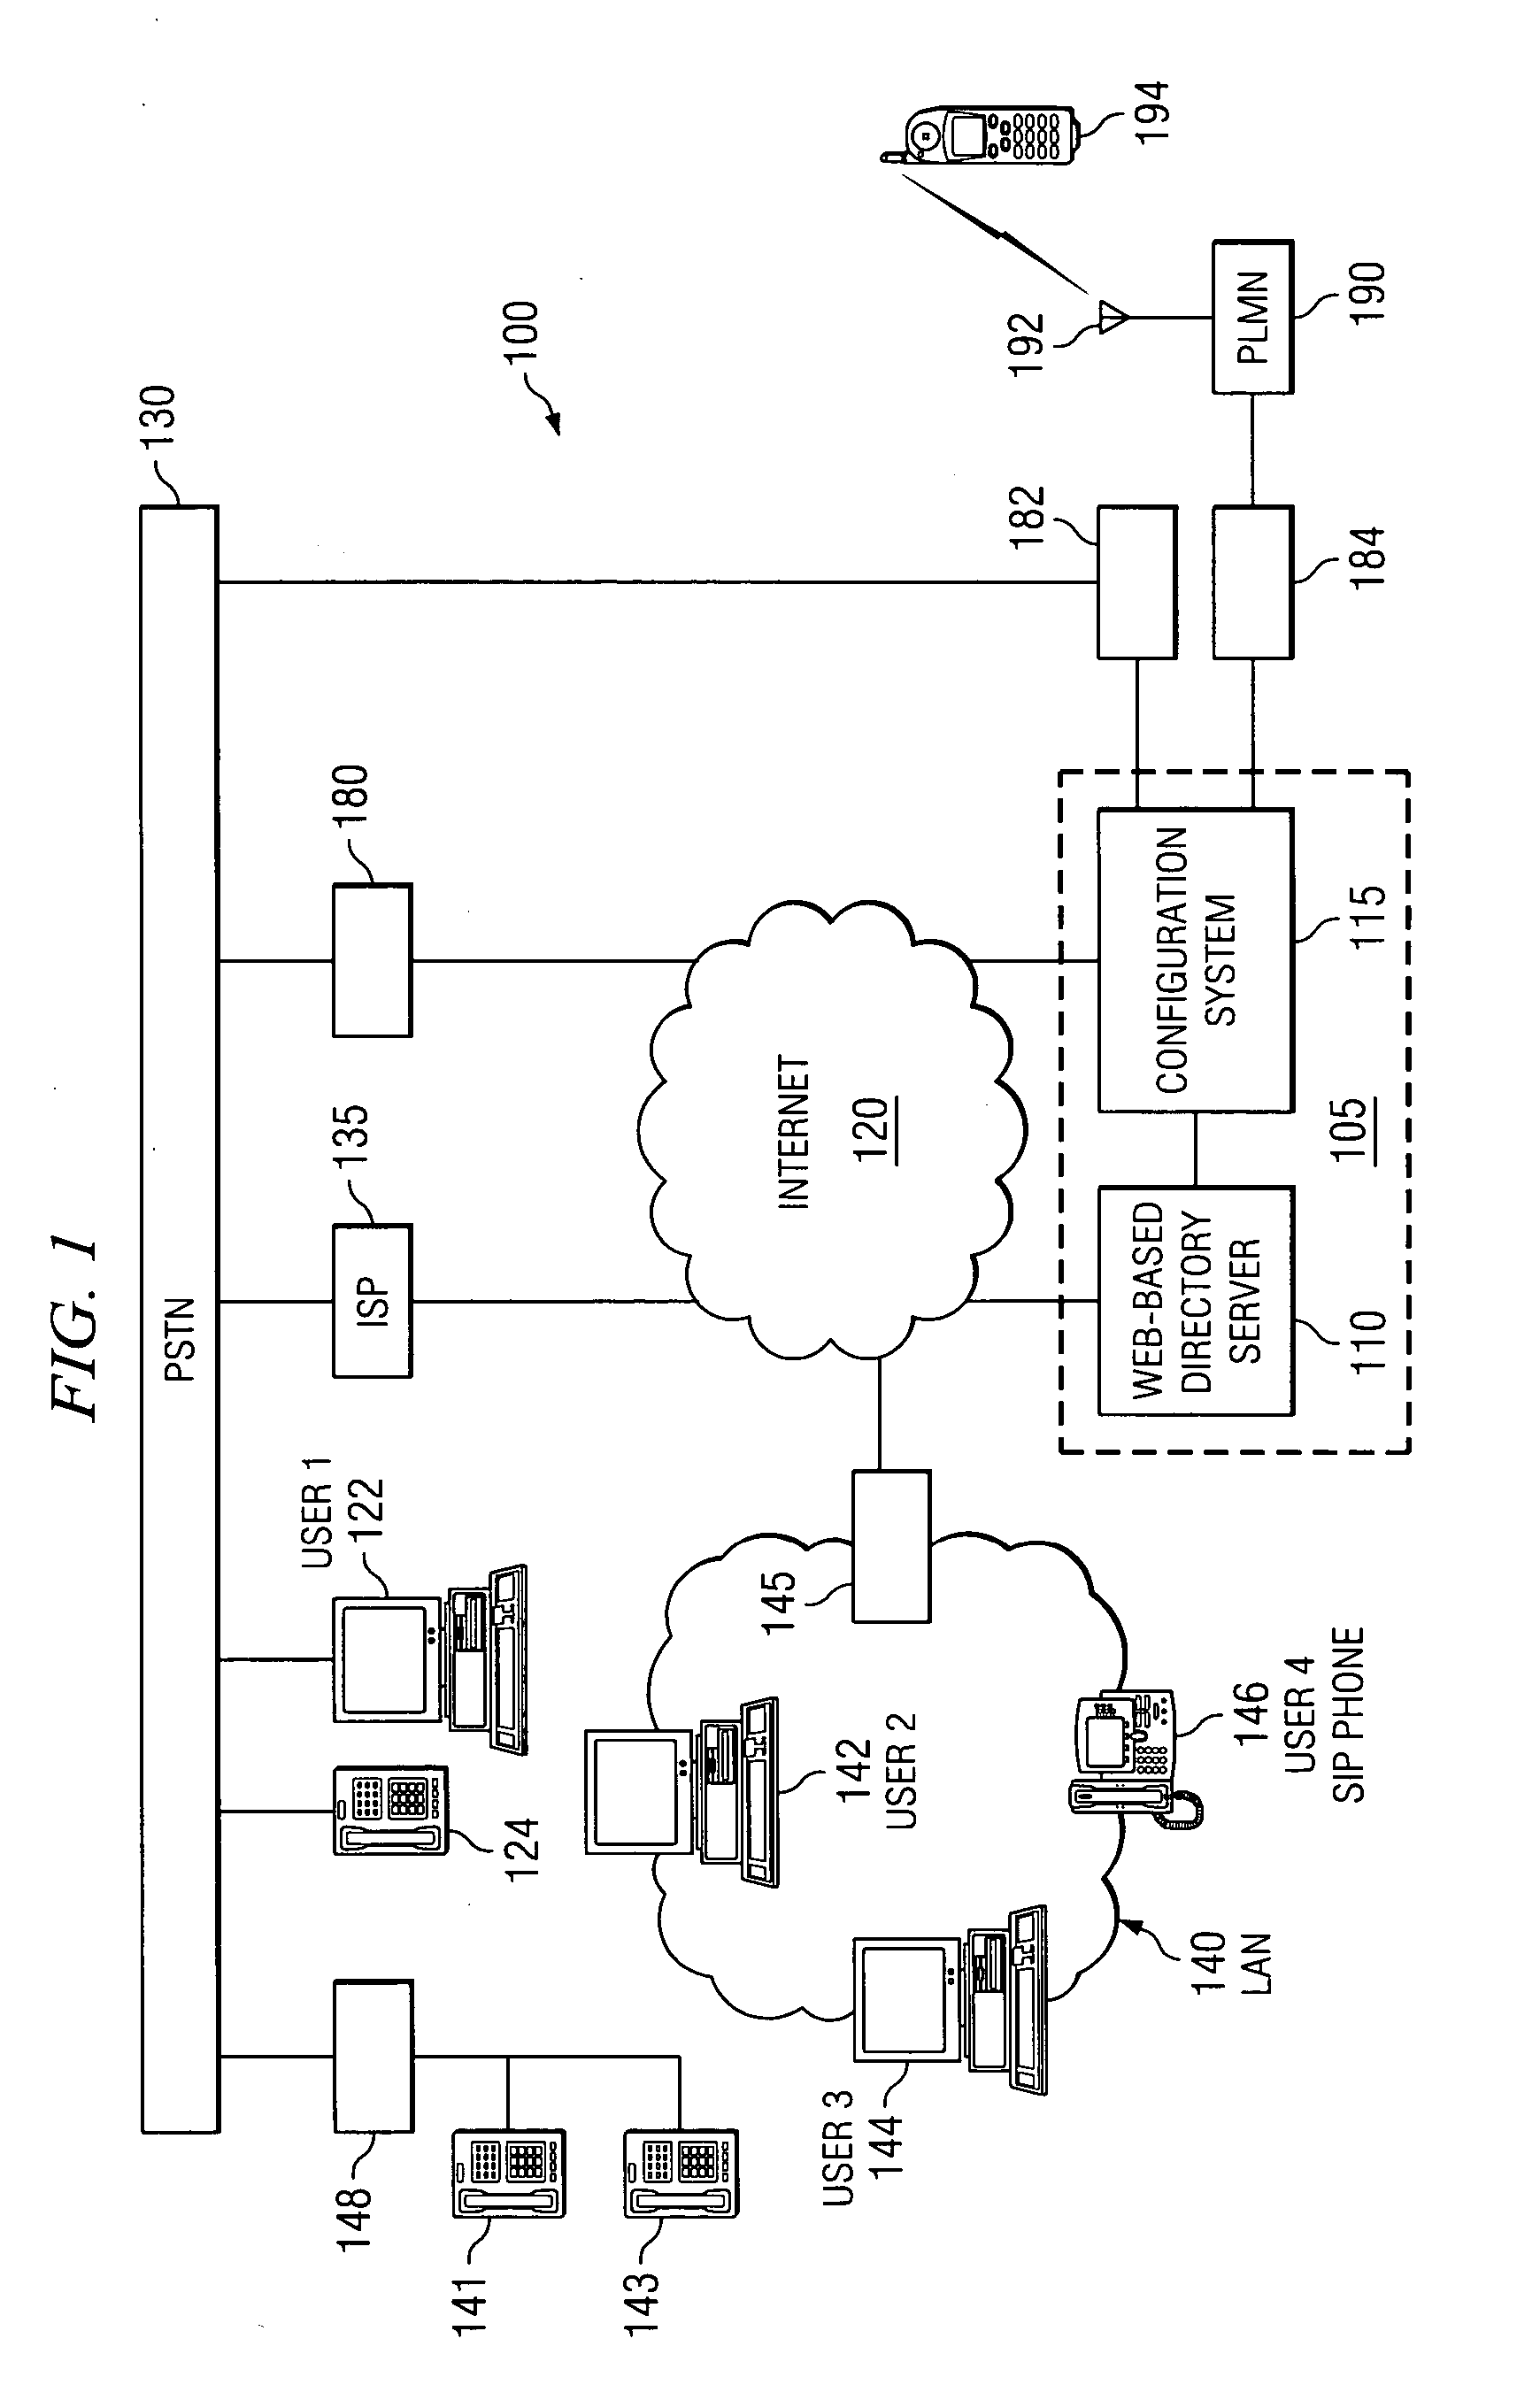 Apparatus and method for a World Wide Web-based directory with automatic call capability